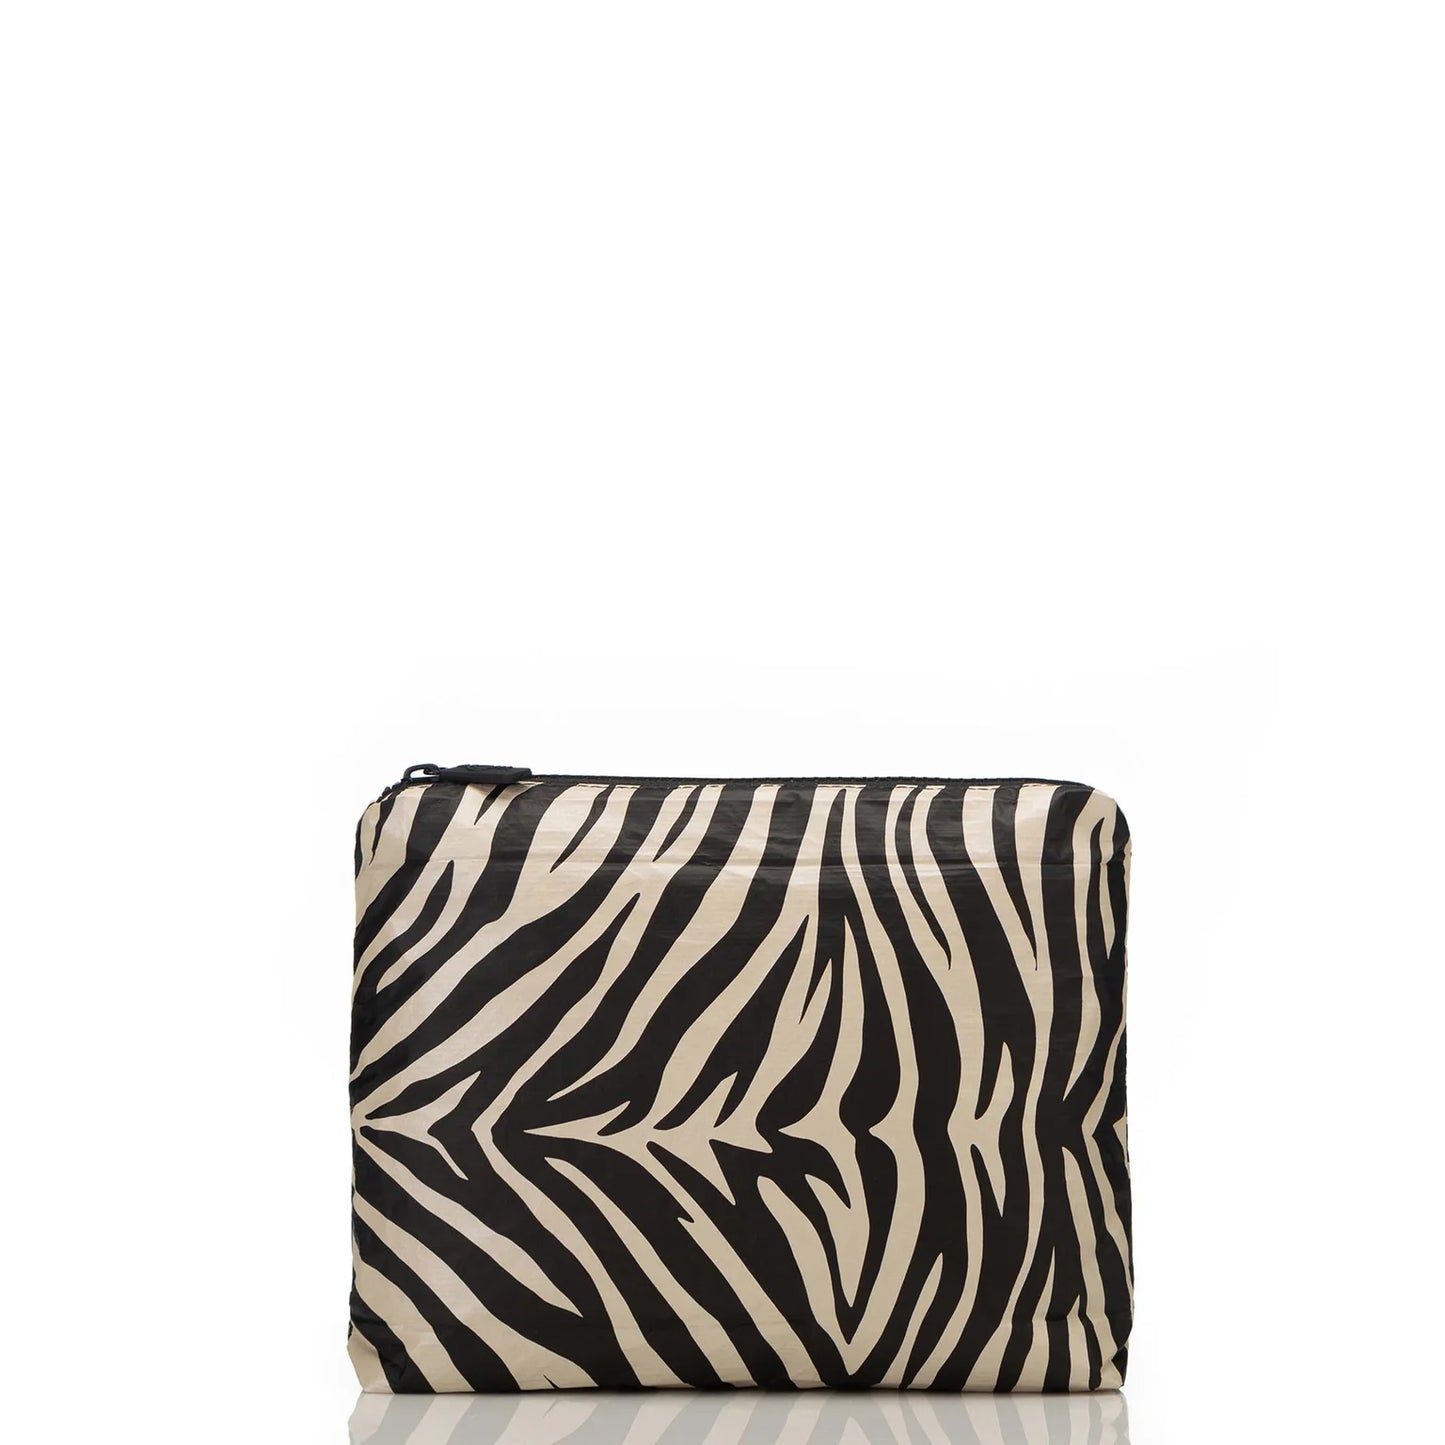 SMALL POUCH EYE OF THE TIGER - MOON SHIMMER ON BLACK